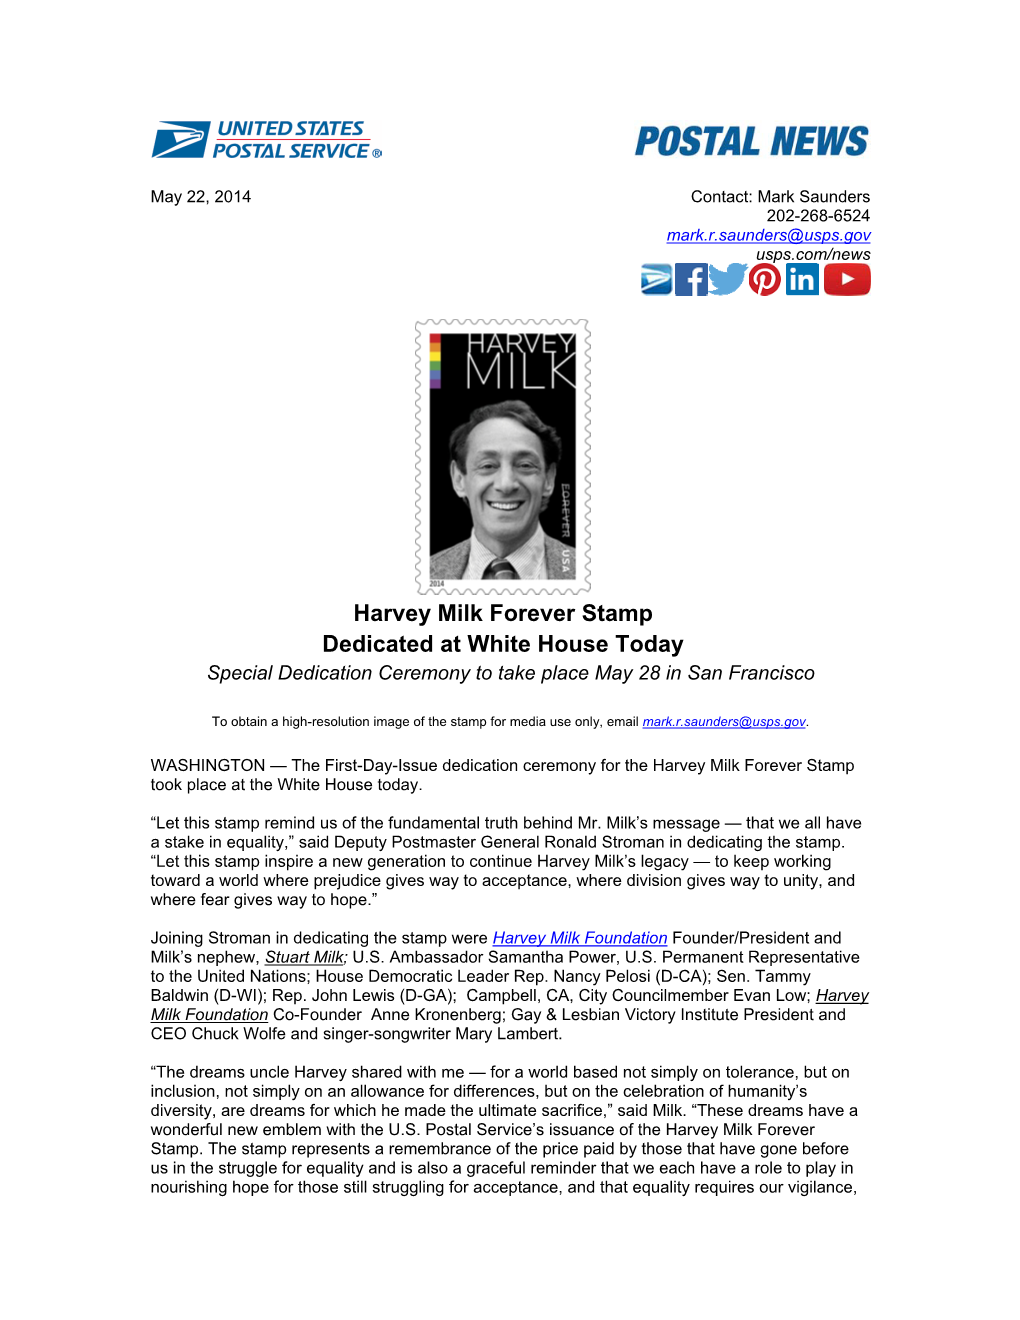 Harvey Milk Forever Stamp Dedicated at White House Today Special Dedication Ceremony to Take Place May 28 in San Francisco